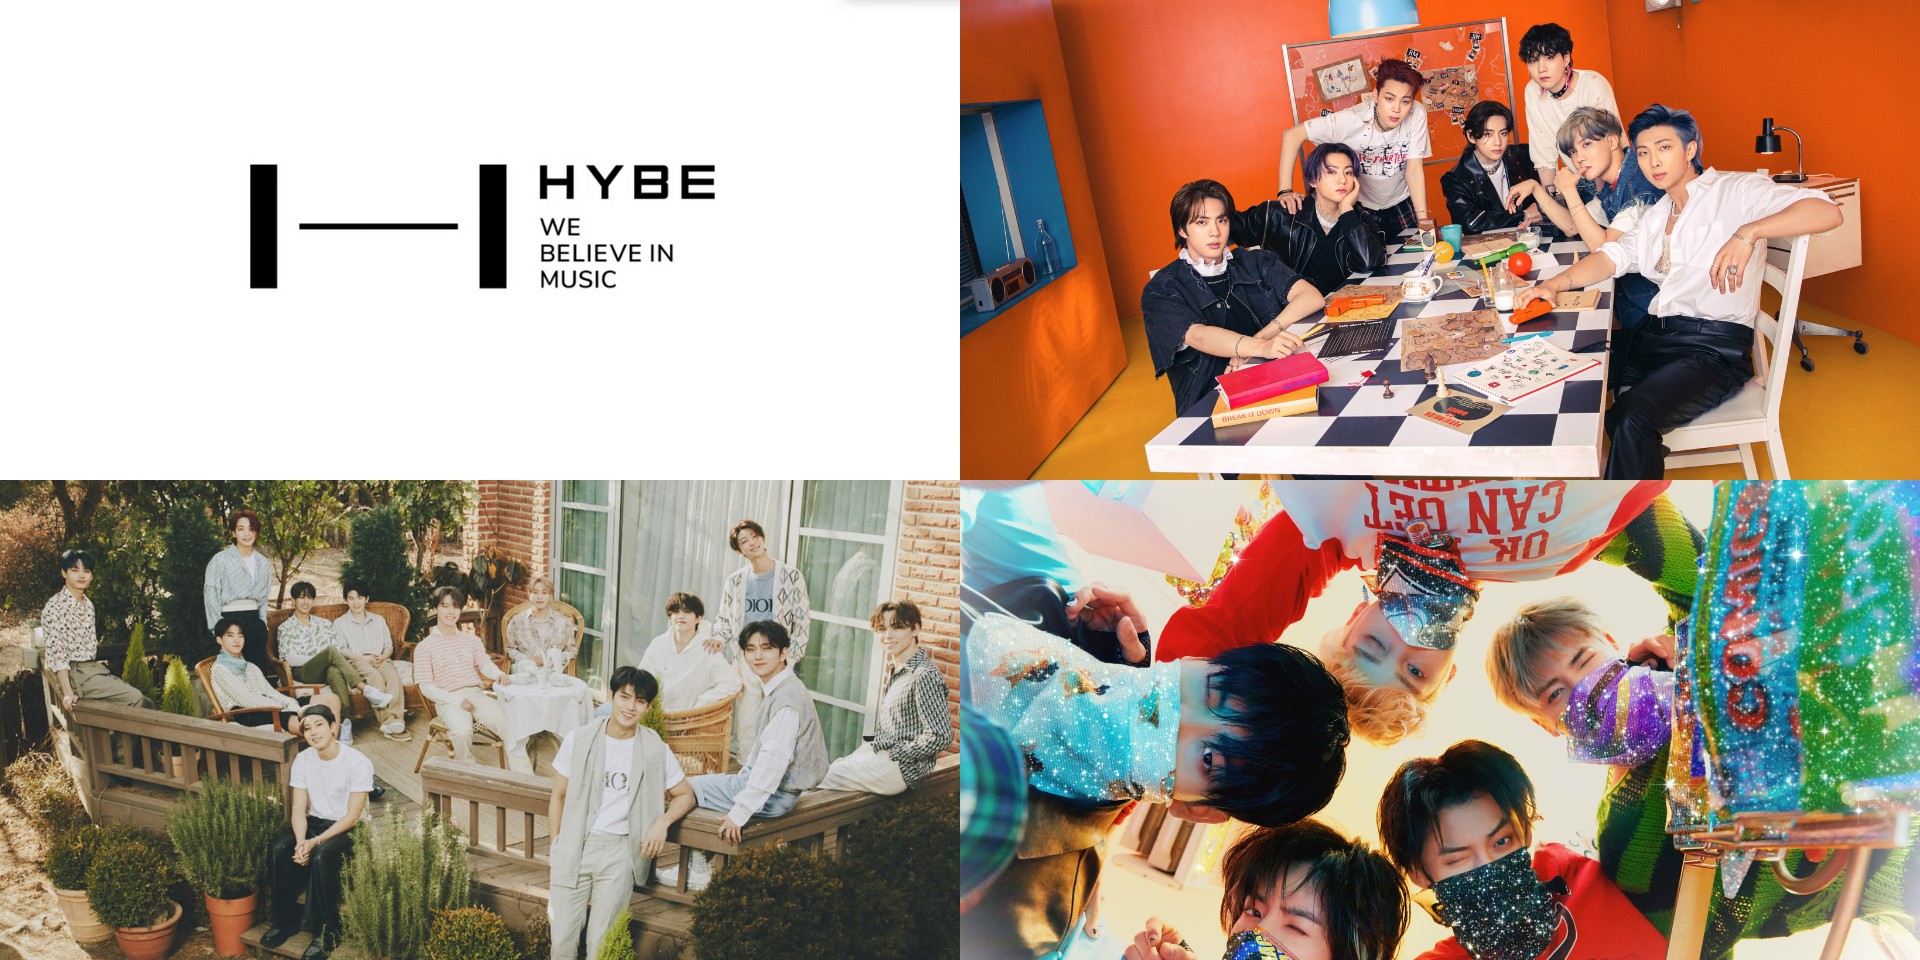 HYBE earns $244 million in Q2 - driven by releases from BTS, SEVENTEEN, TOMORROW X TOGETHER, plus BTS' MUSTER SOWOOZOO ticket sales